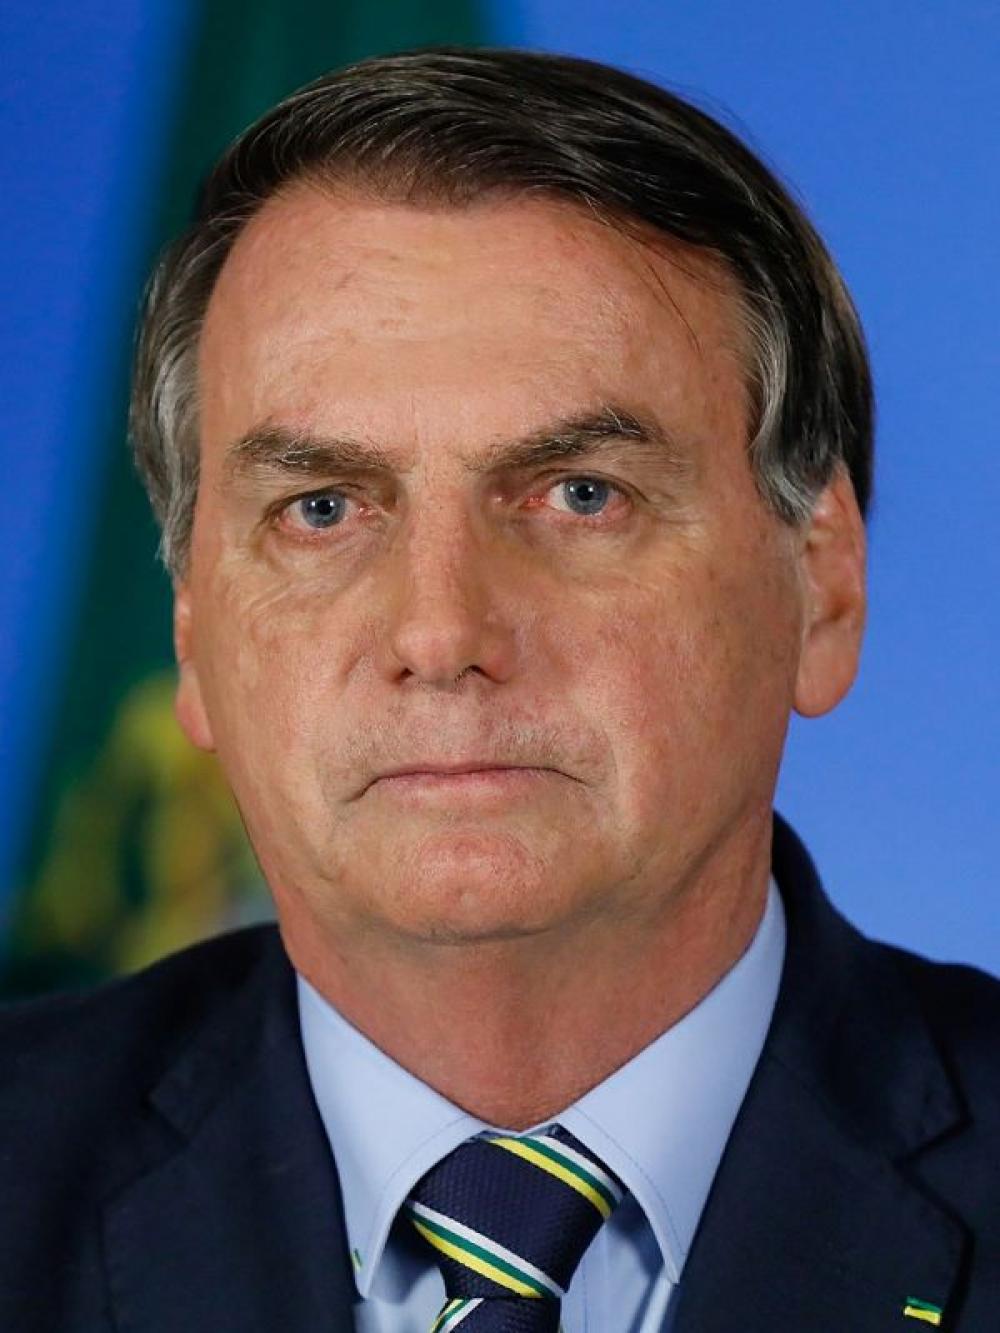 Thousands protest in Brazil demanding Prez Bolsonaro's removal over mishandling of Covid, Covaxin deal